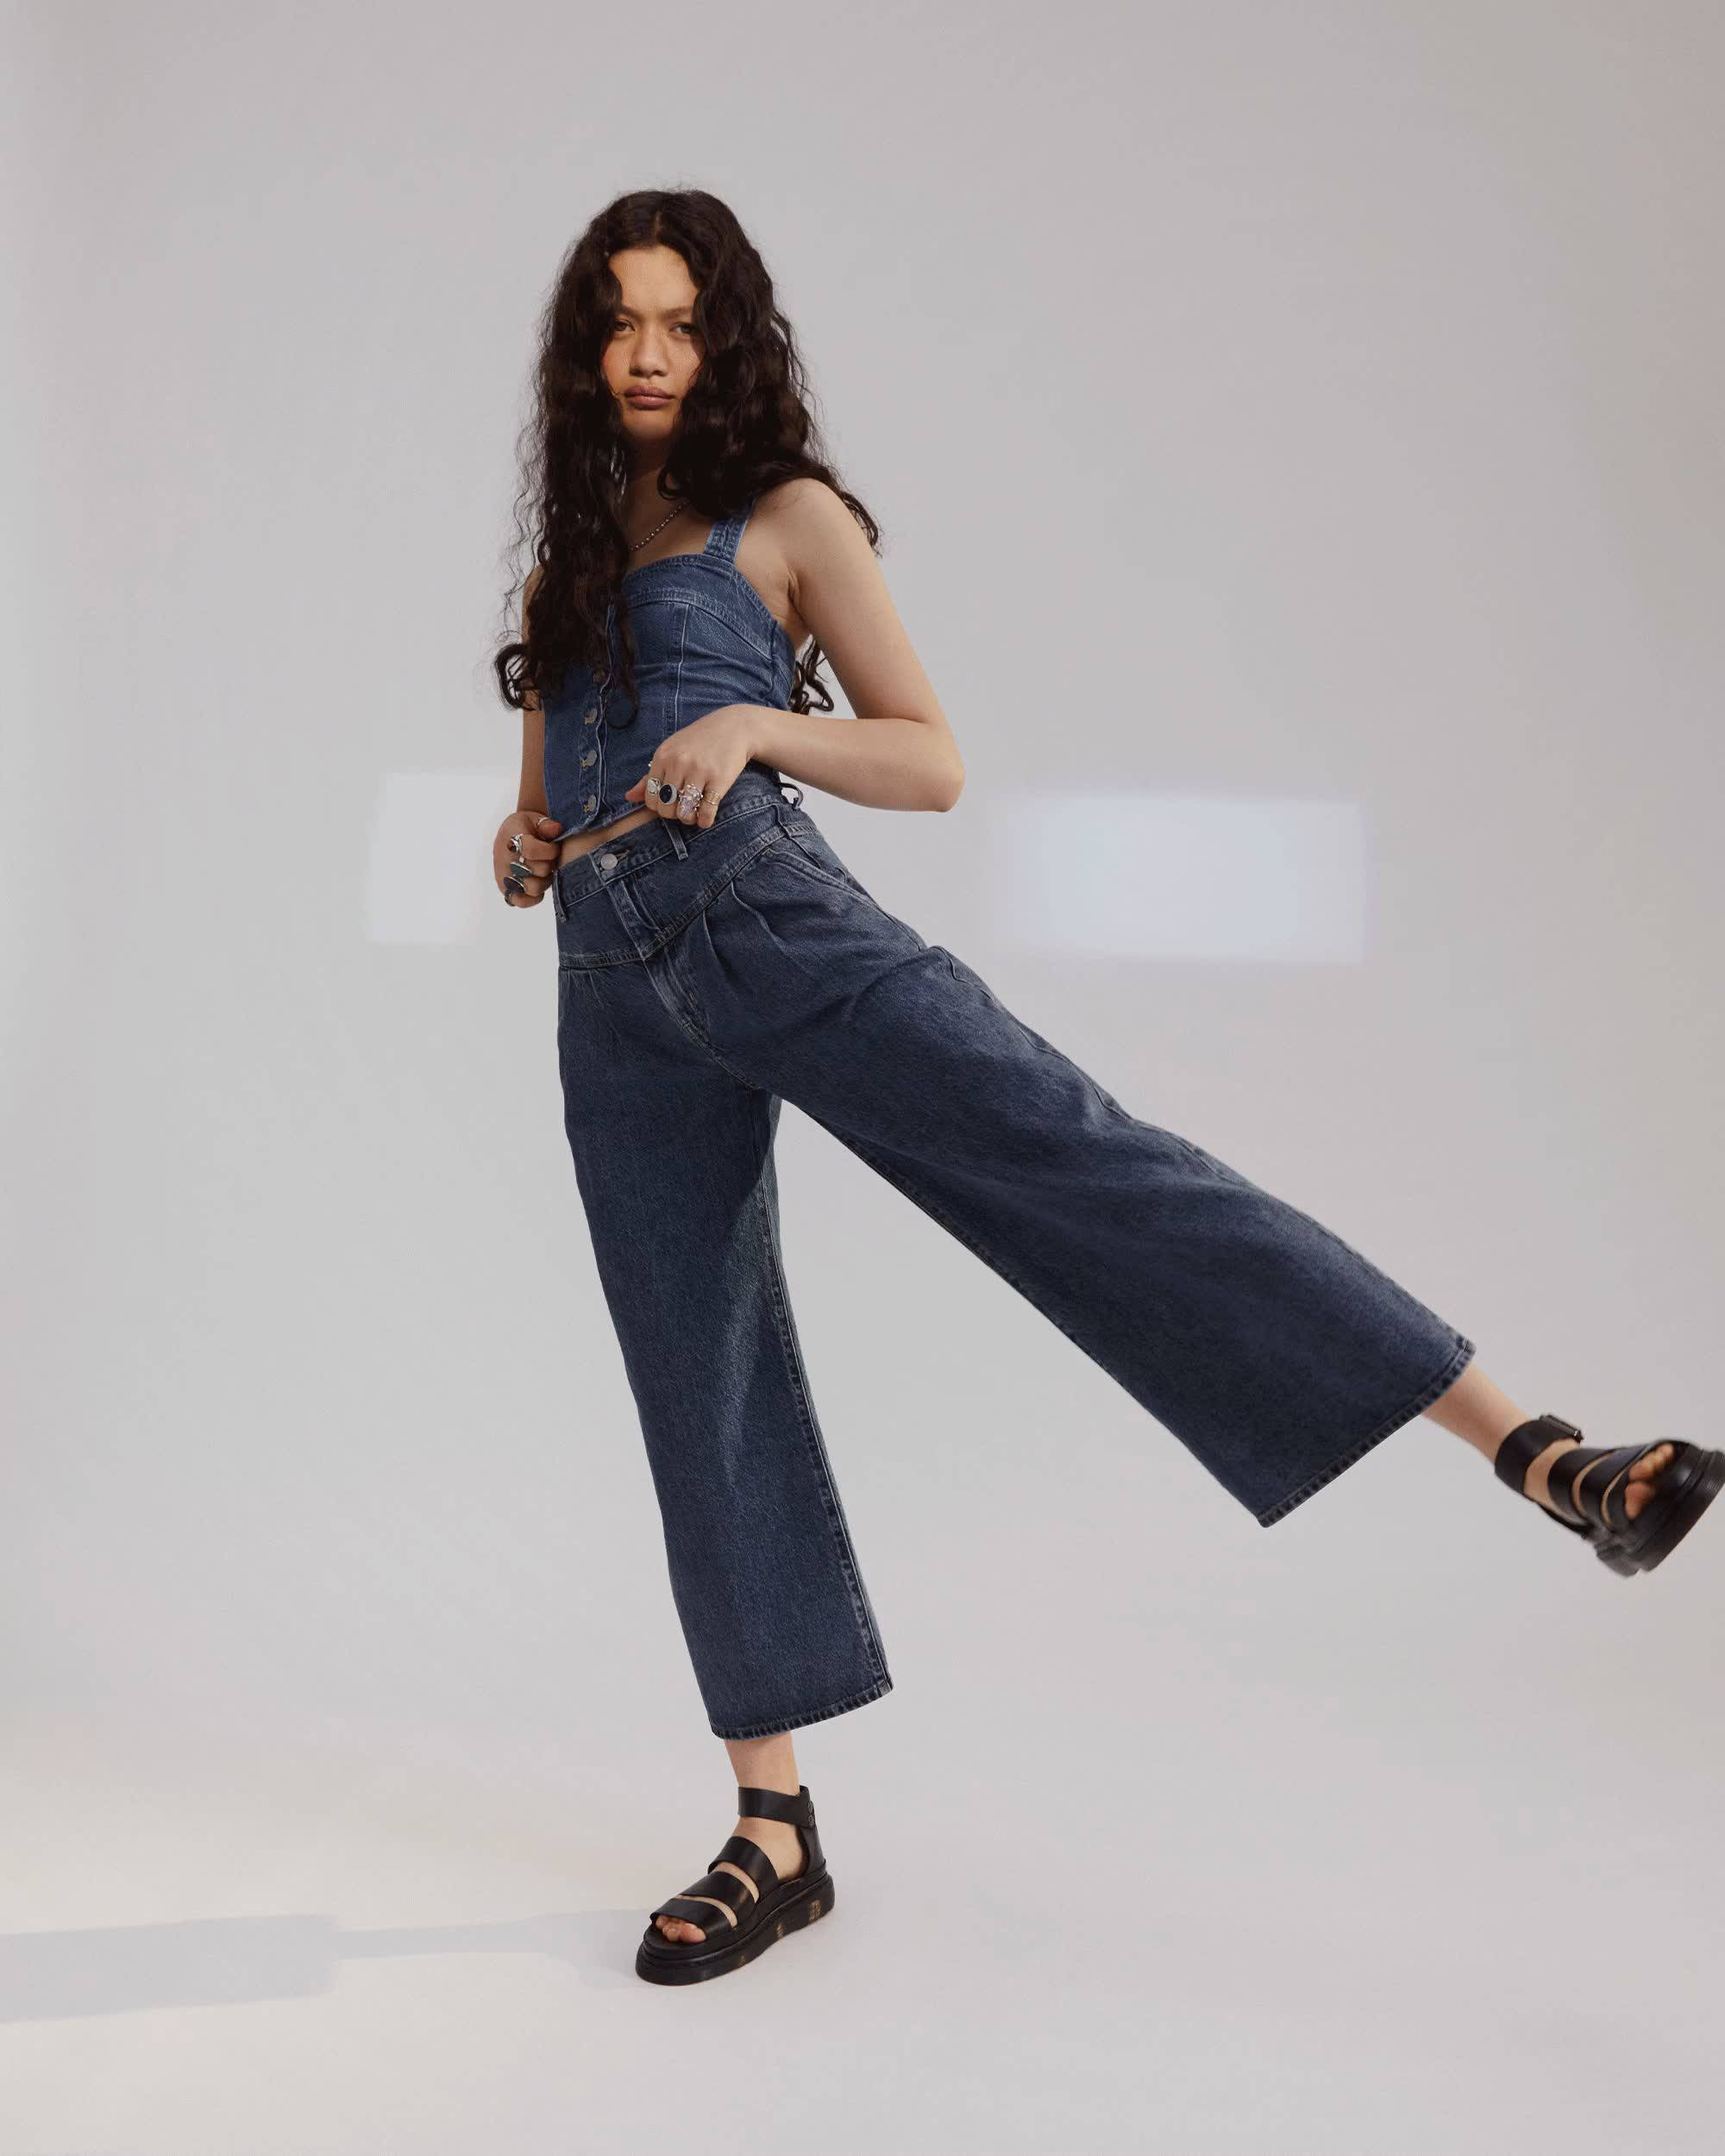 Fashion: Are You Ready For The Return Of Sand-Washed Denim?, The Journal